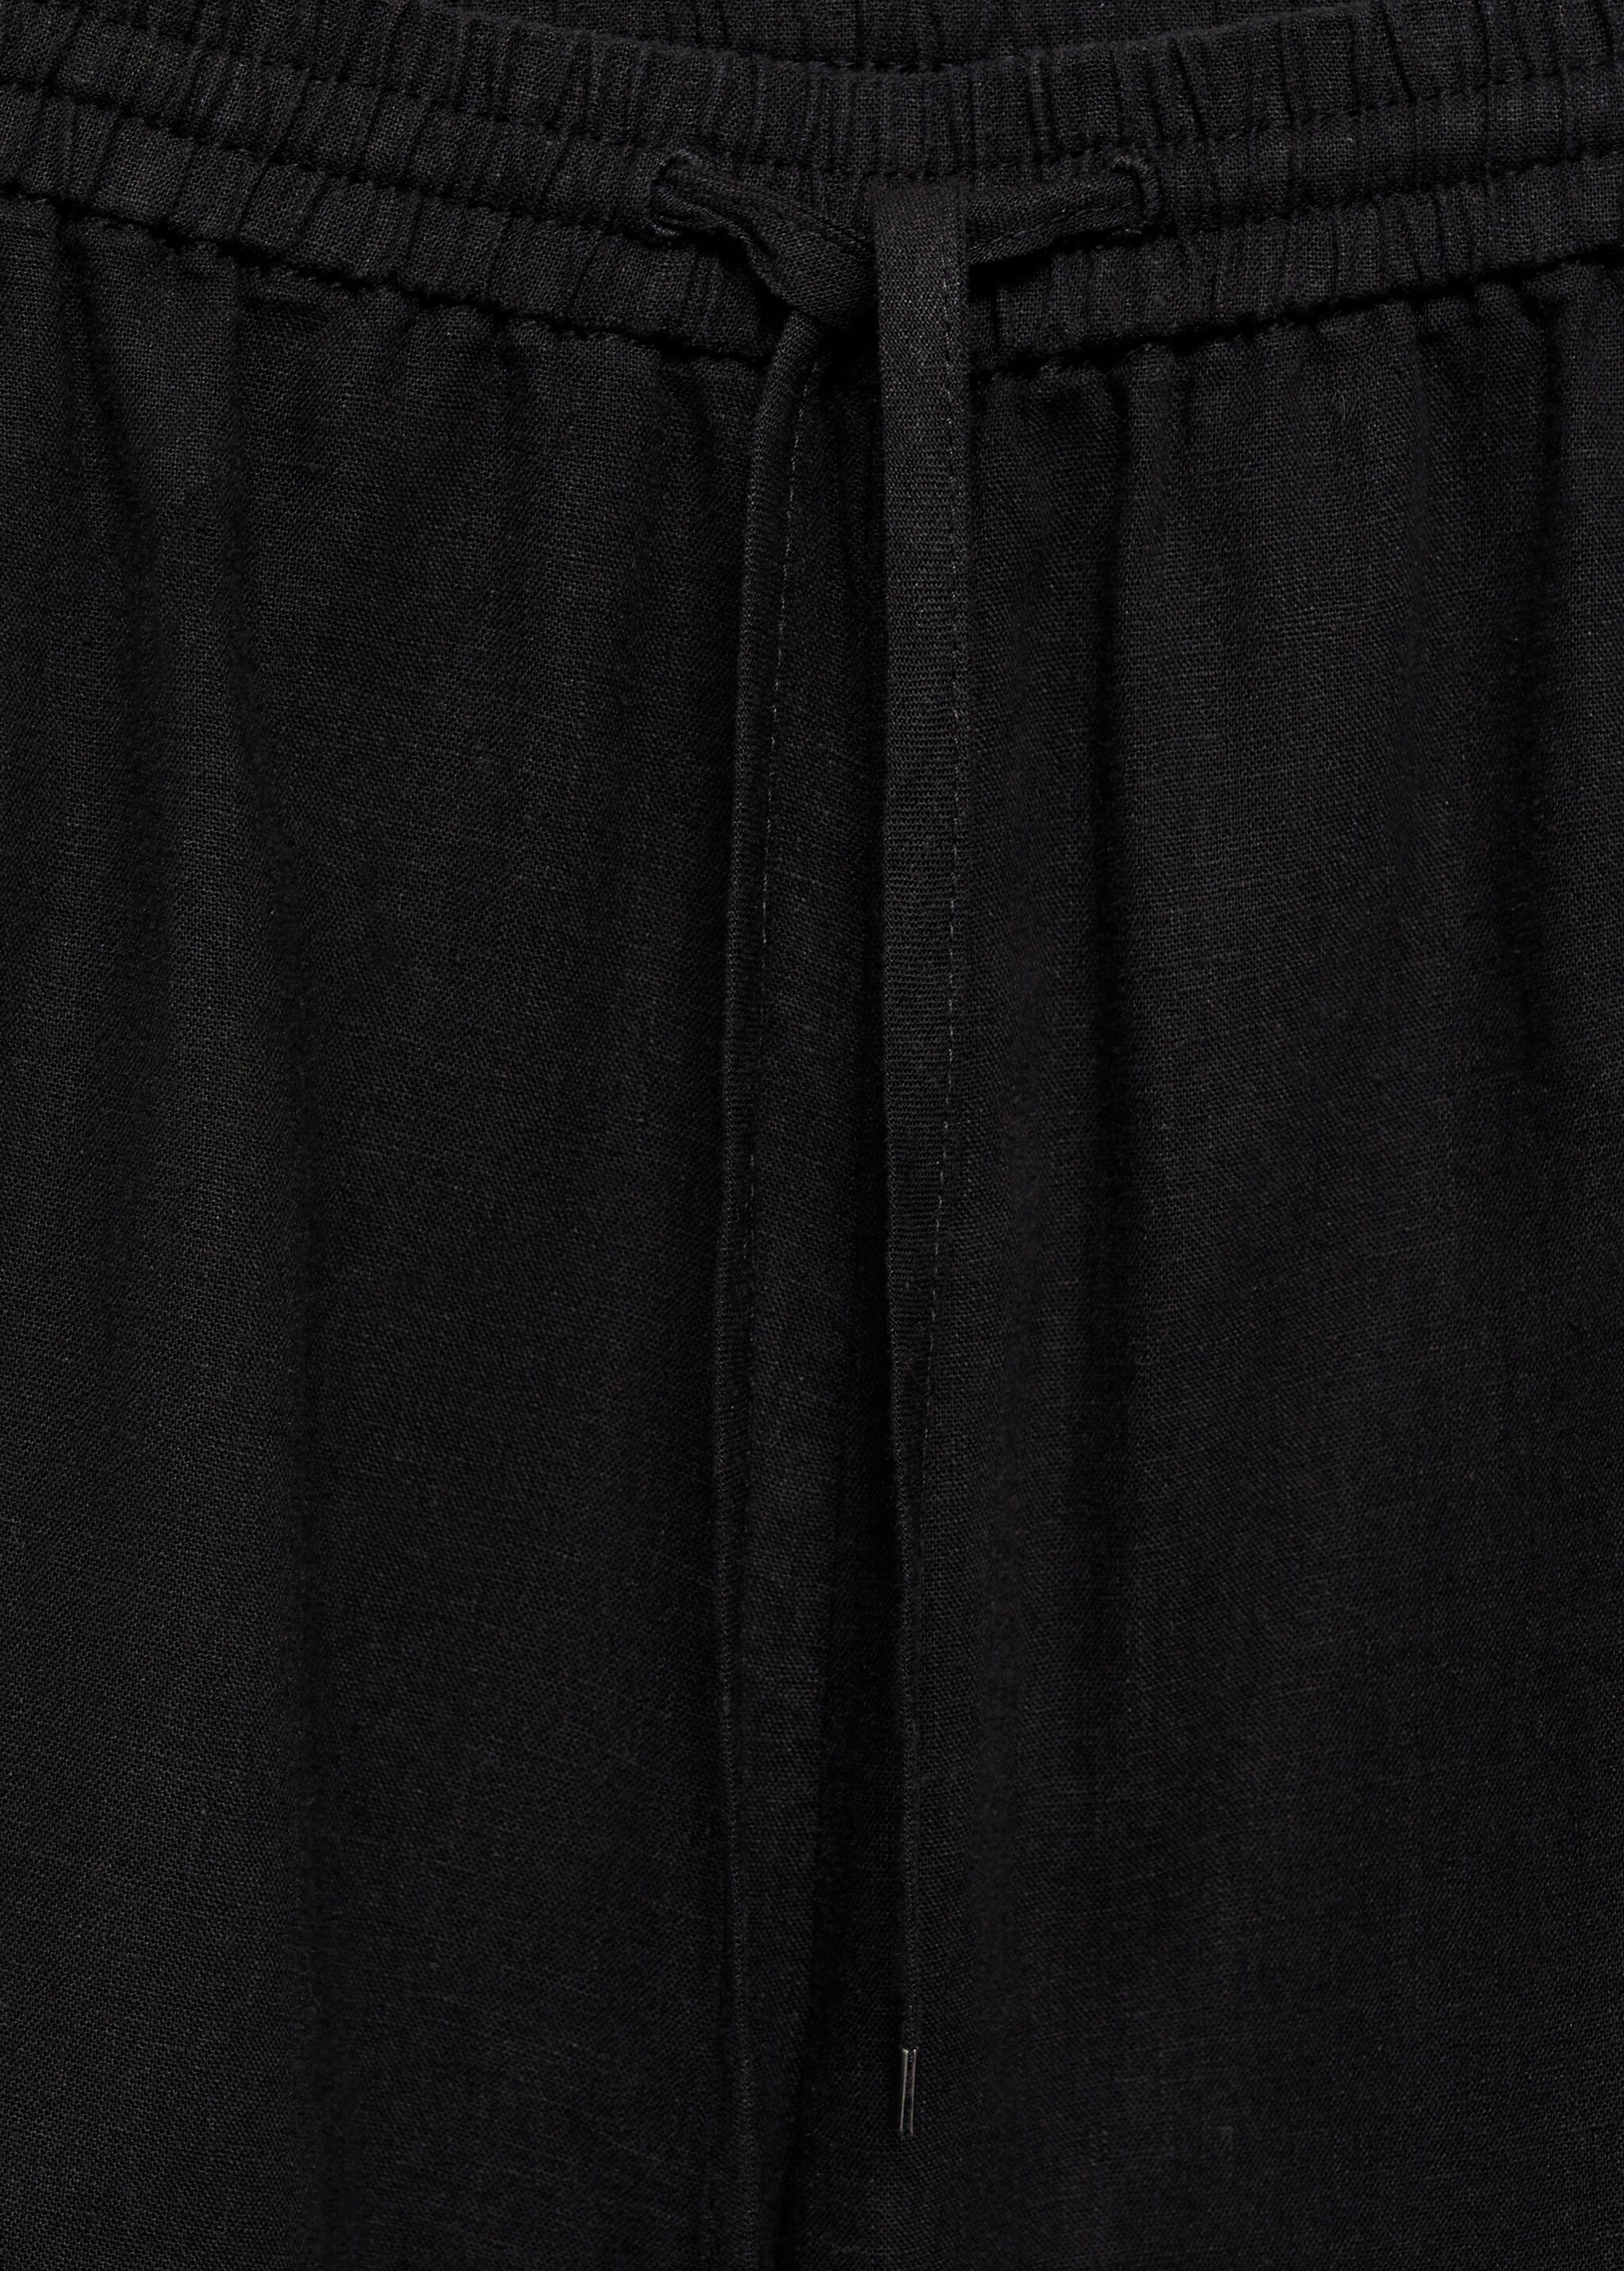 Fluid tie shorts - Details of the article 8